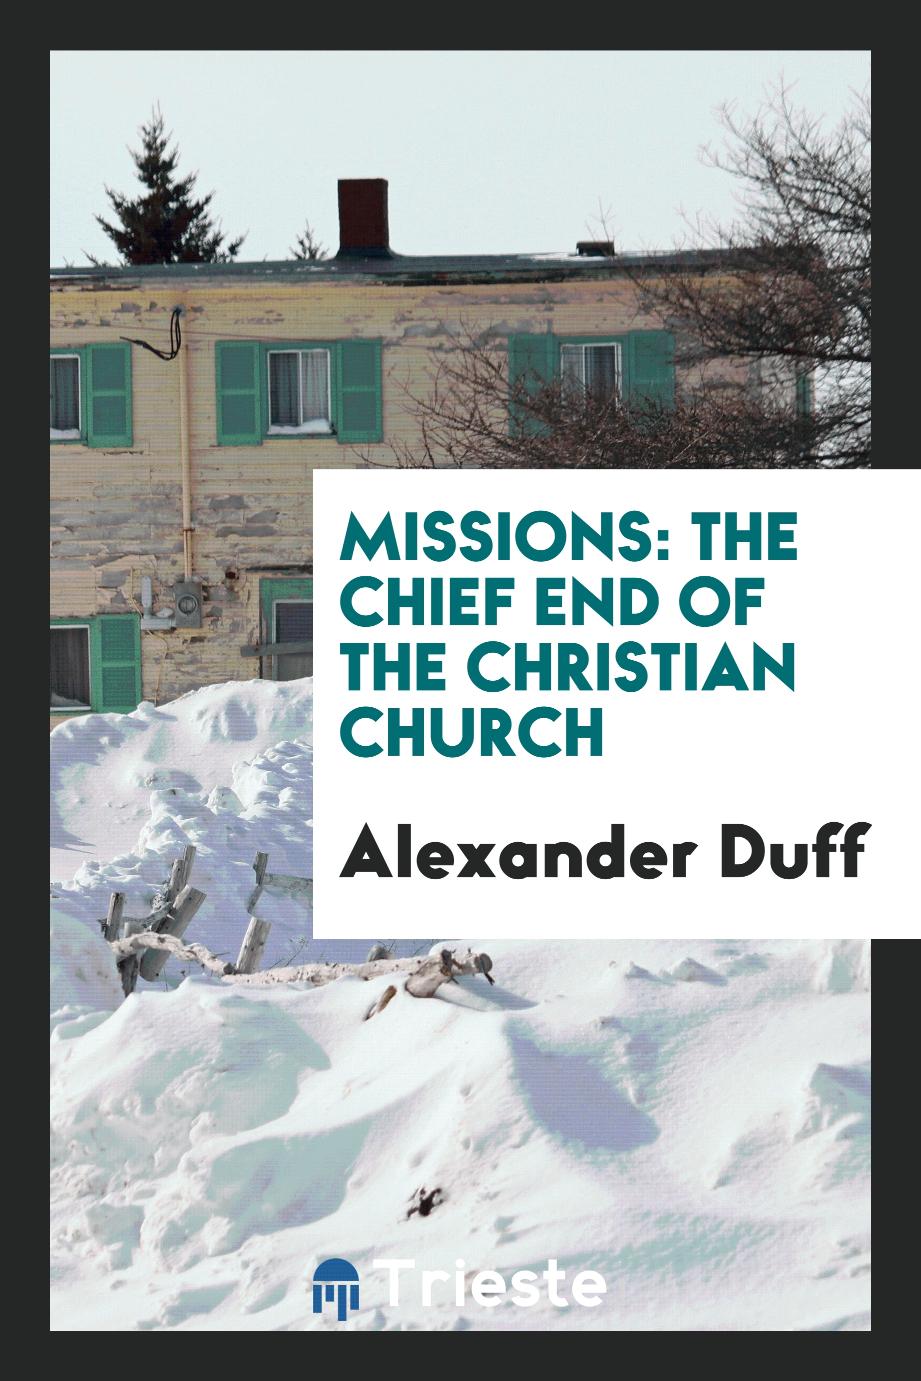 Missions: the chief end of the Christian church